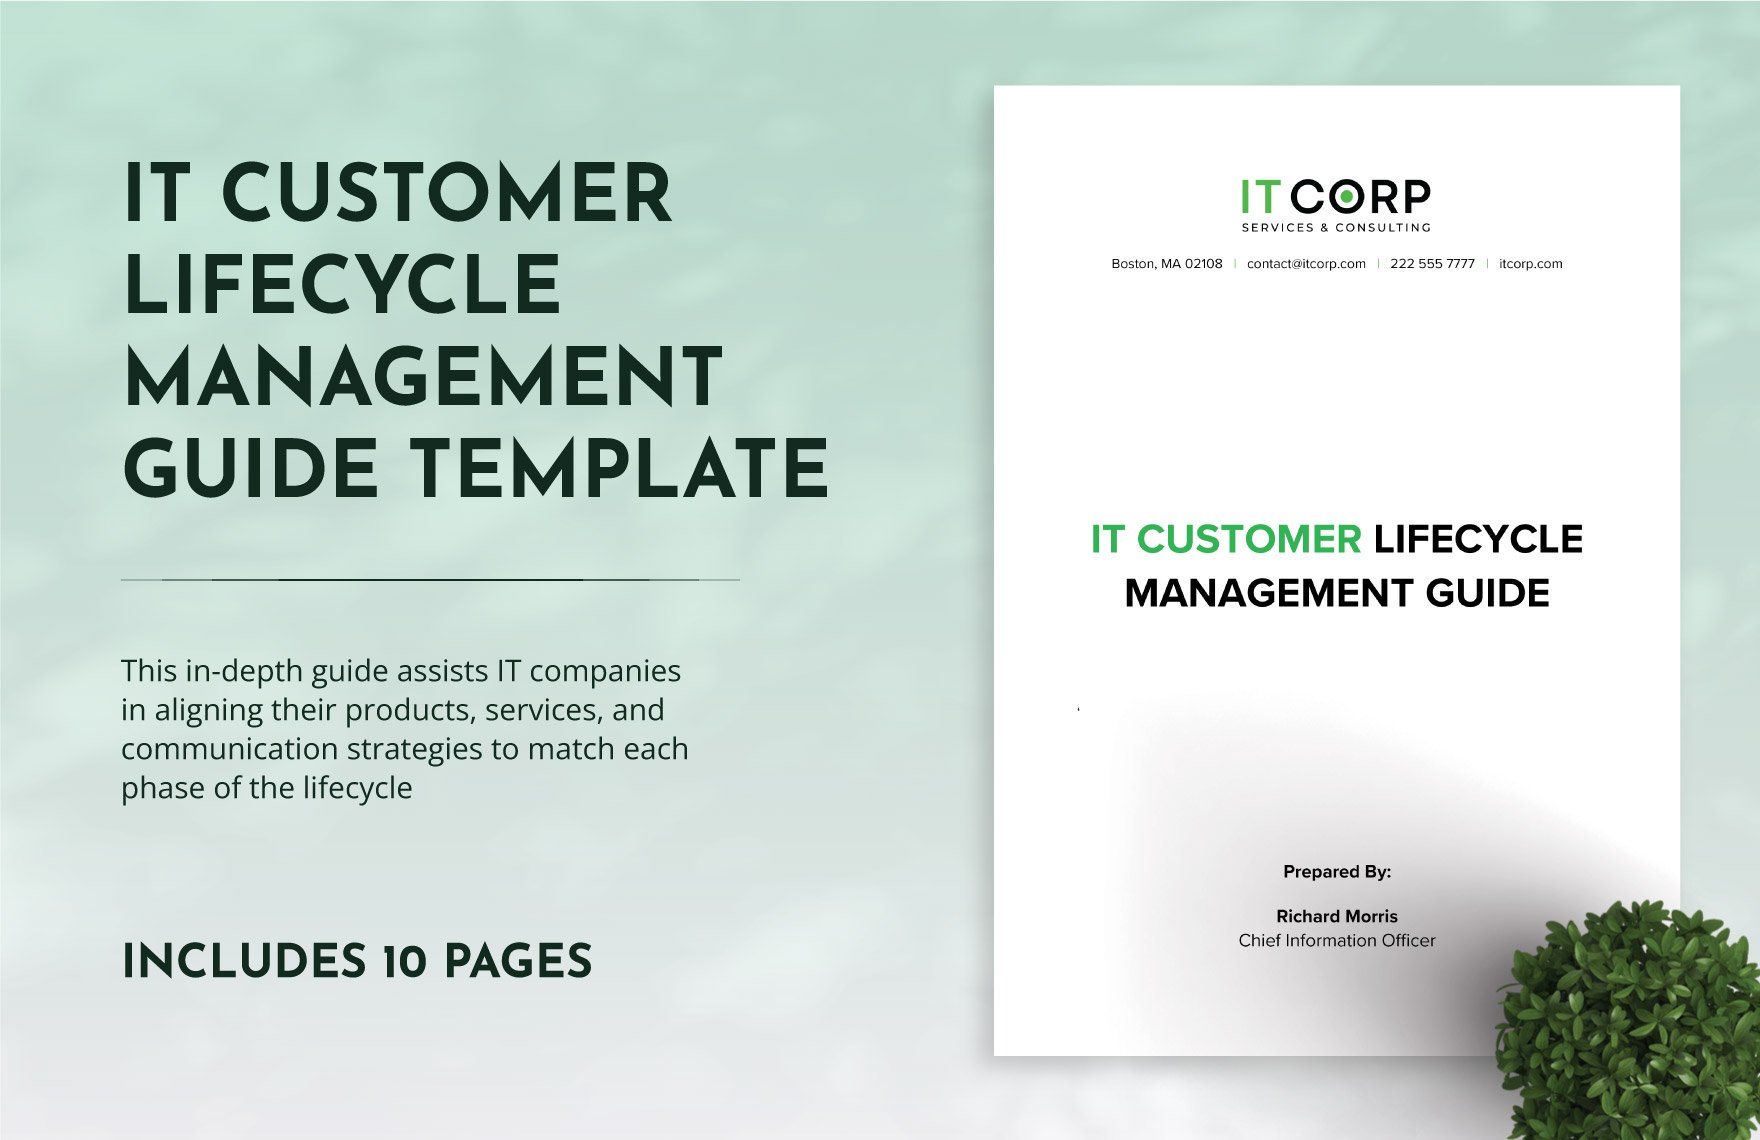 IT Customer Lifecycle Management Guide Template